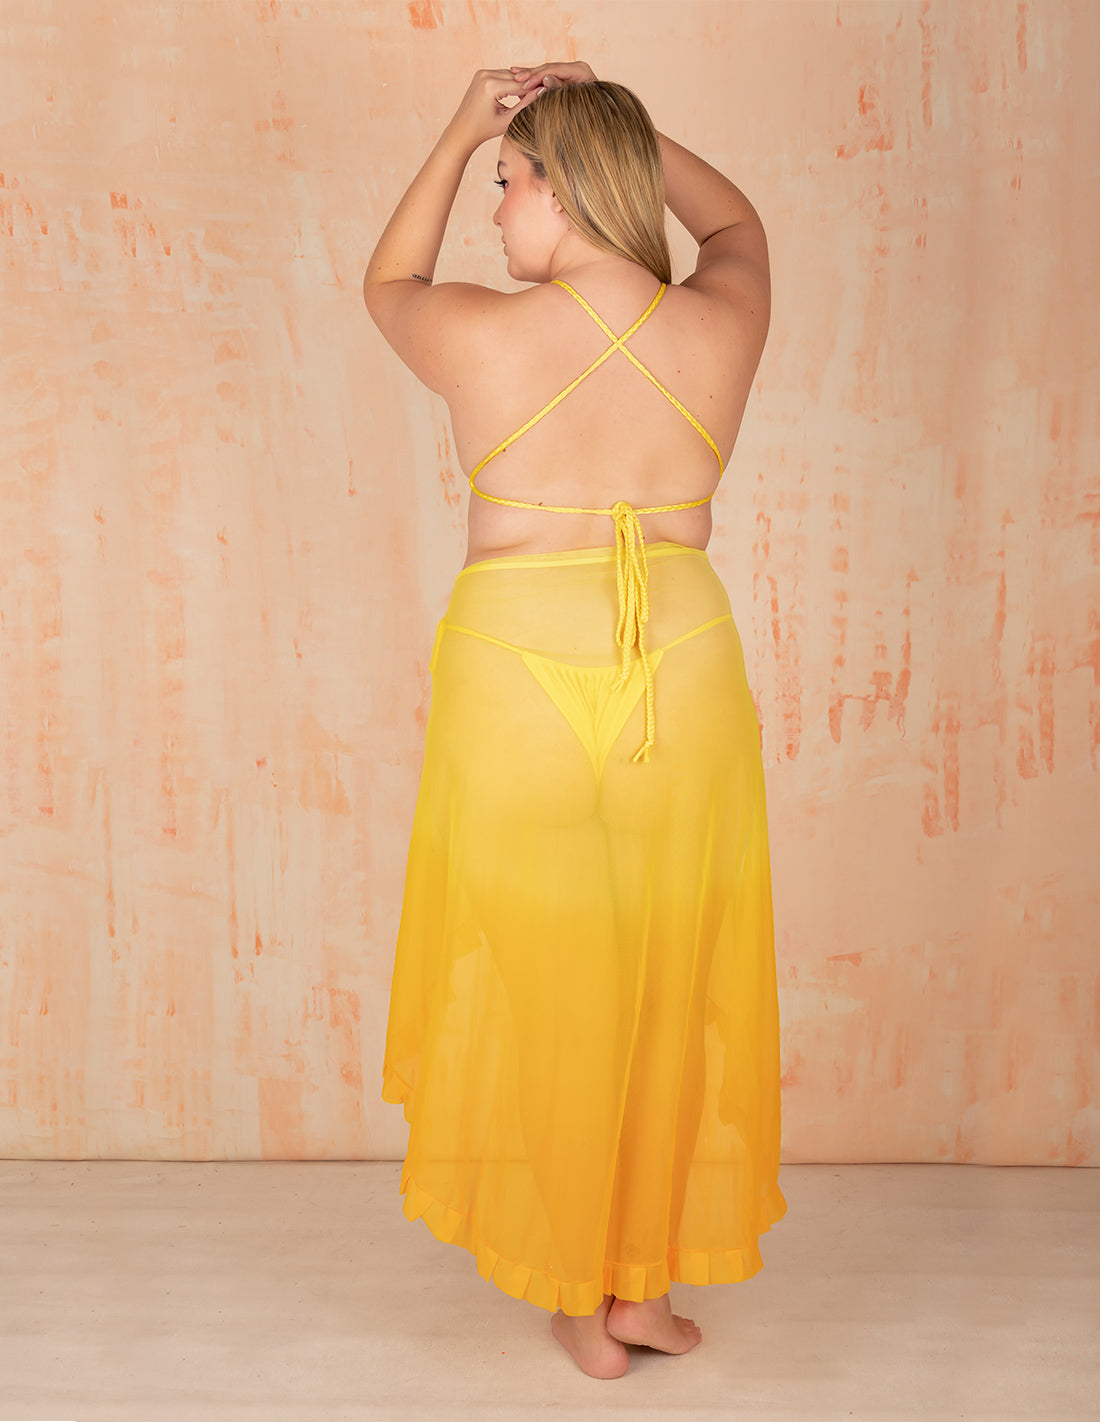 Calm Beach Wrap Yellow + Gold Yellow. Hand-Dyed Beach Wrap Cover-Up In Yellow + Gold Yellow. Entreaguas